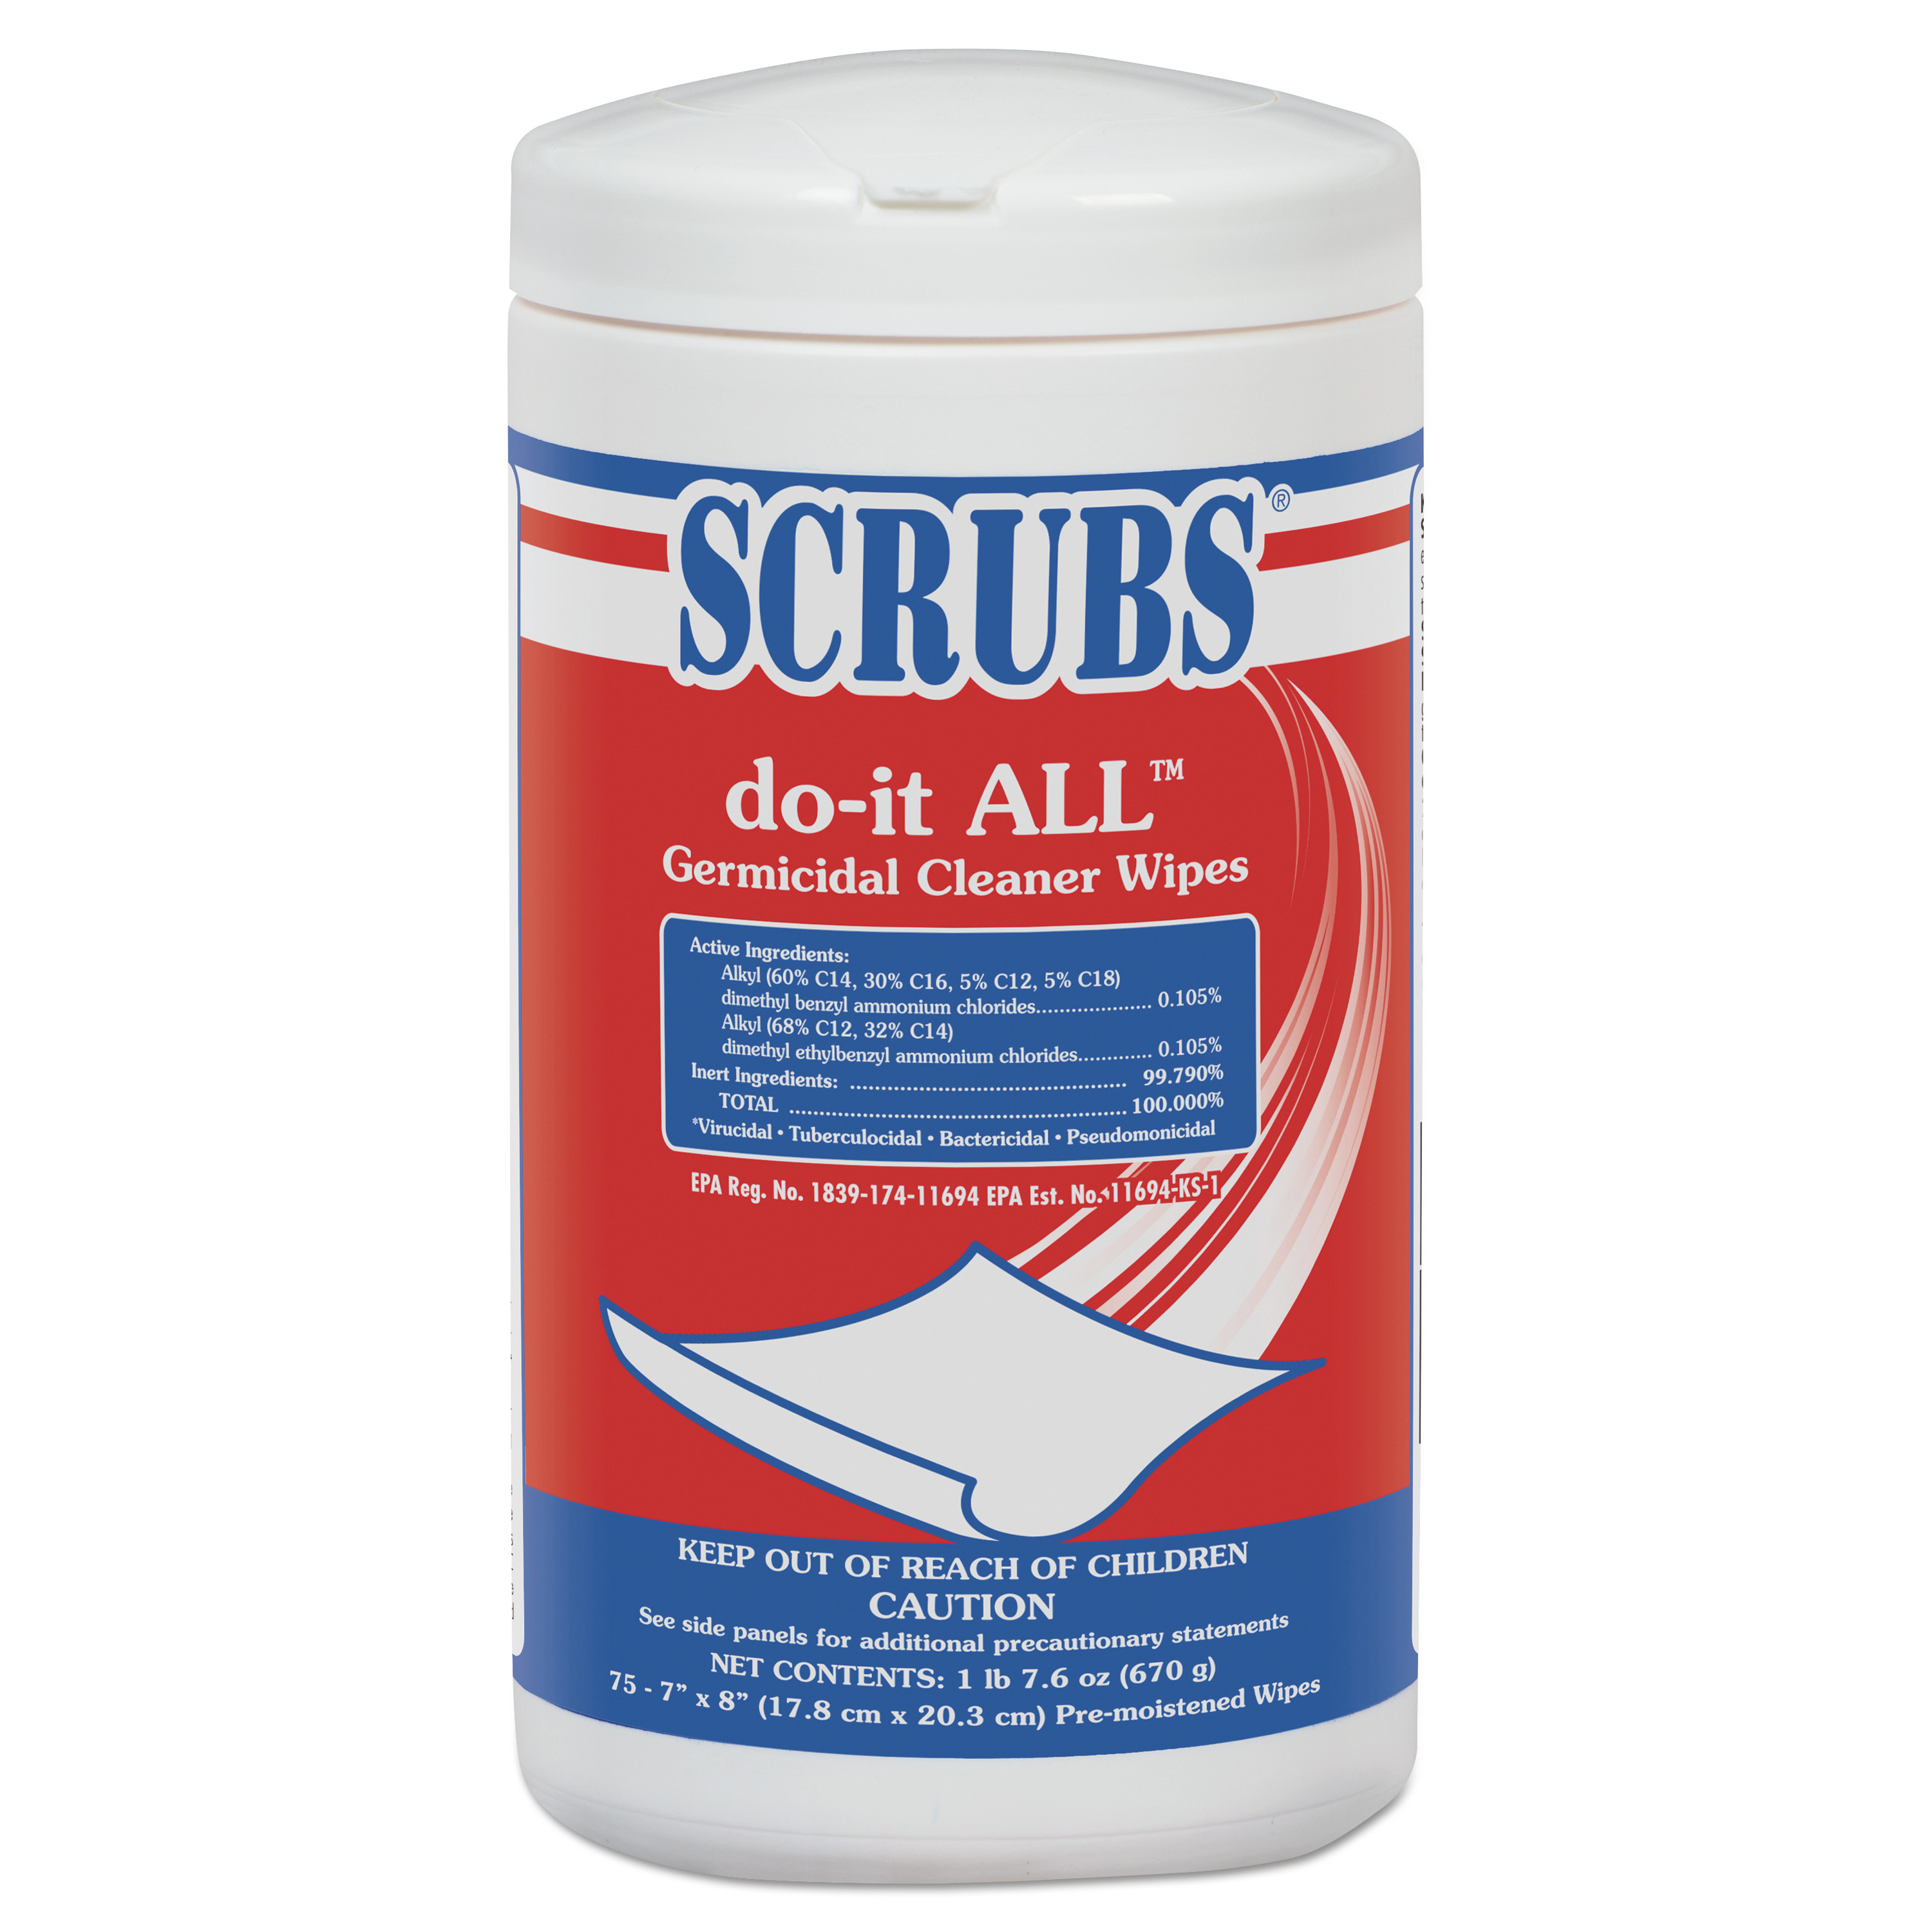  SCRUBS 98075 do-it ALL Germicidal Cleaner Wipes, Lemon, 7 x 8, White, 75/Container, 6/CT (ITW98075) 